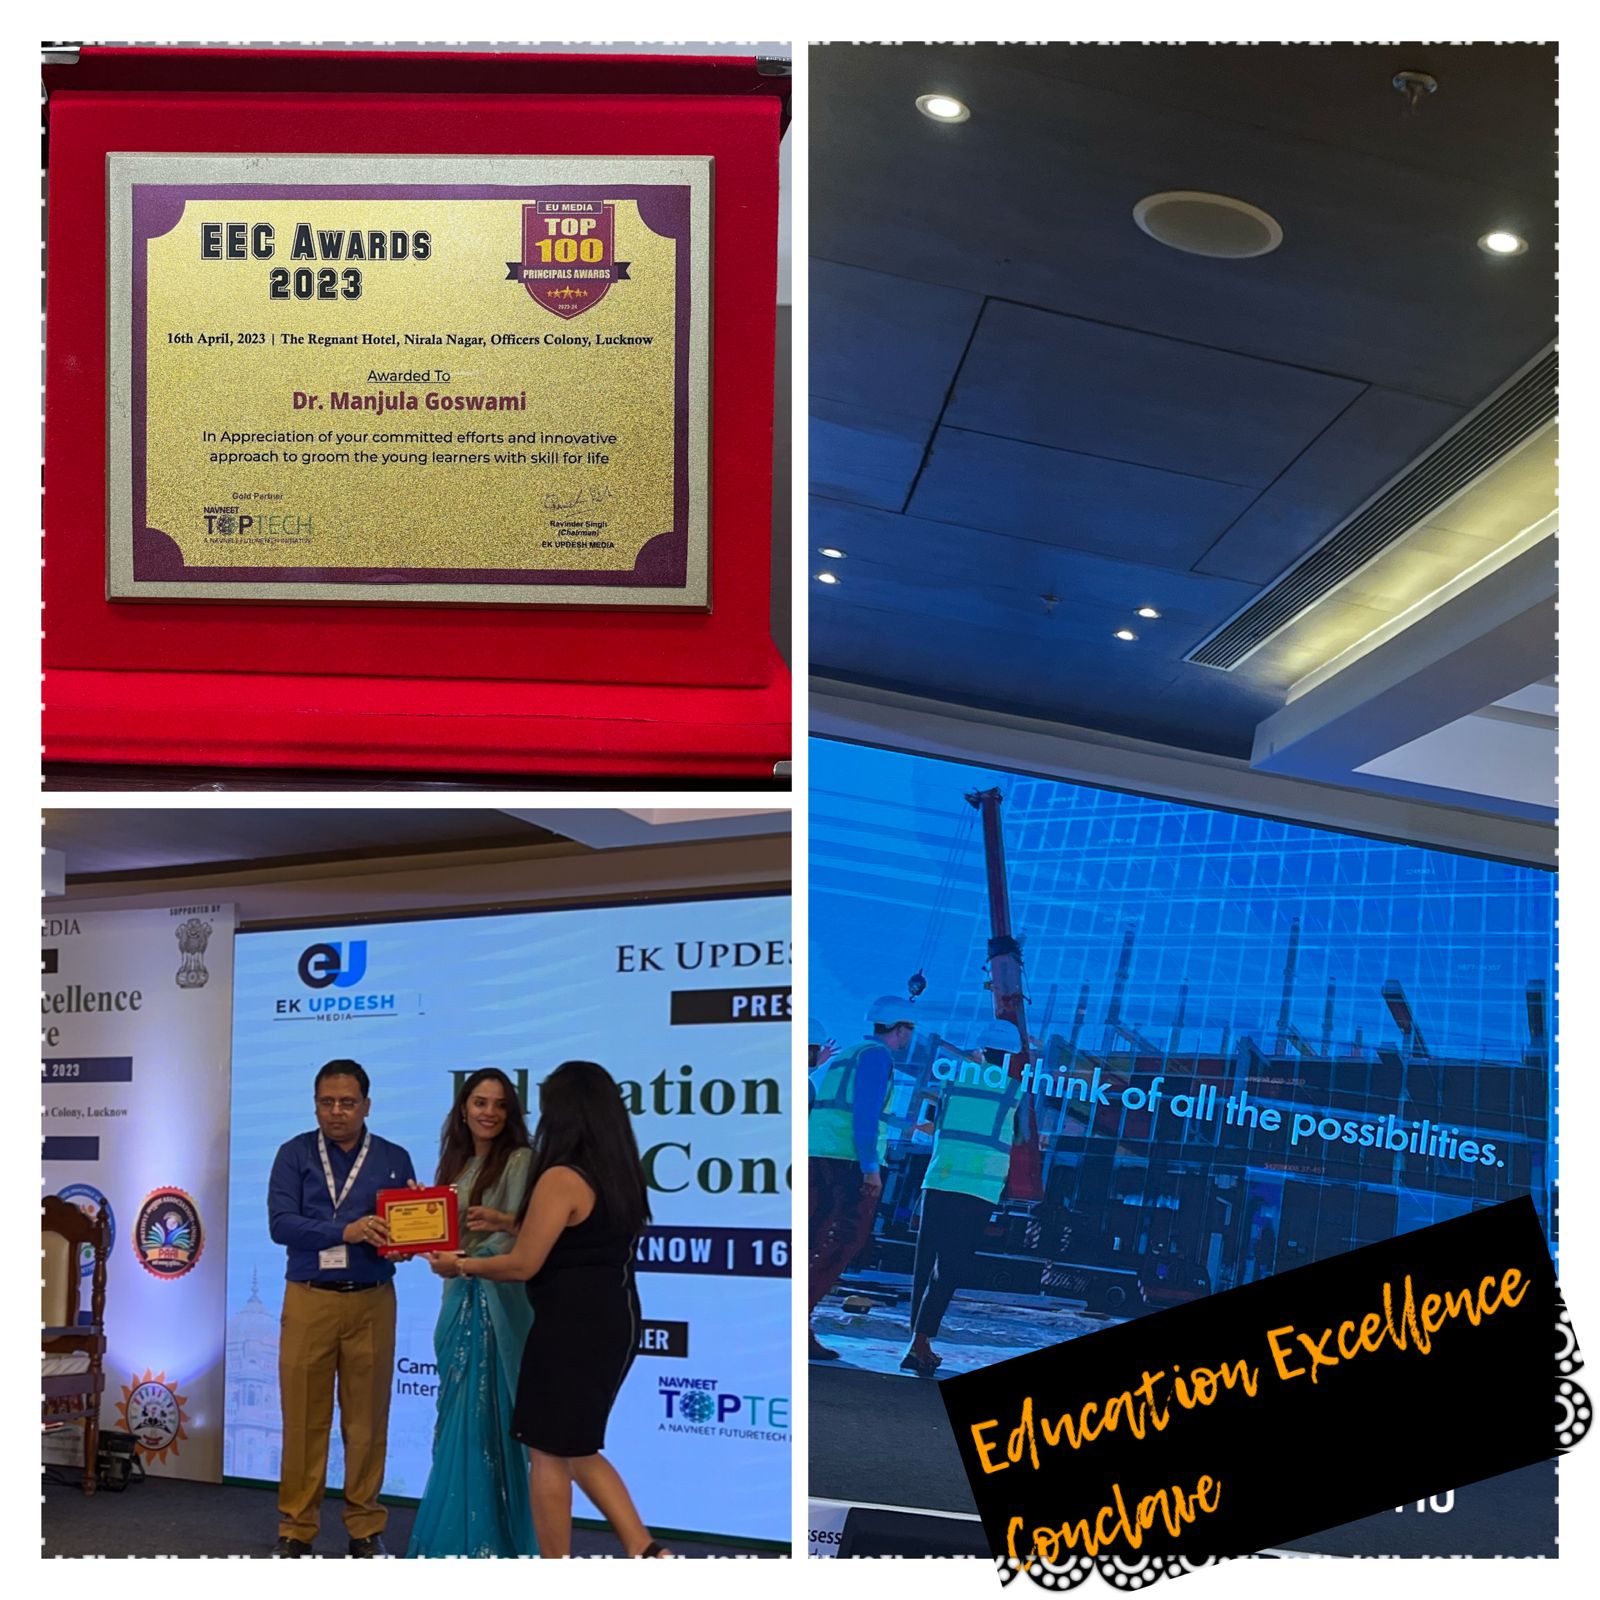 EEC AWARDS 2023 Our Dear Respected Principal ma’am Dr Manjula Goswami was conferred with the Education Excellence Award 2023 at Regnant Hotel for her committed and innovative efforts in the field of education to groom the young minds.